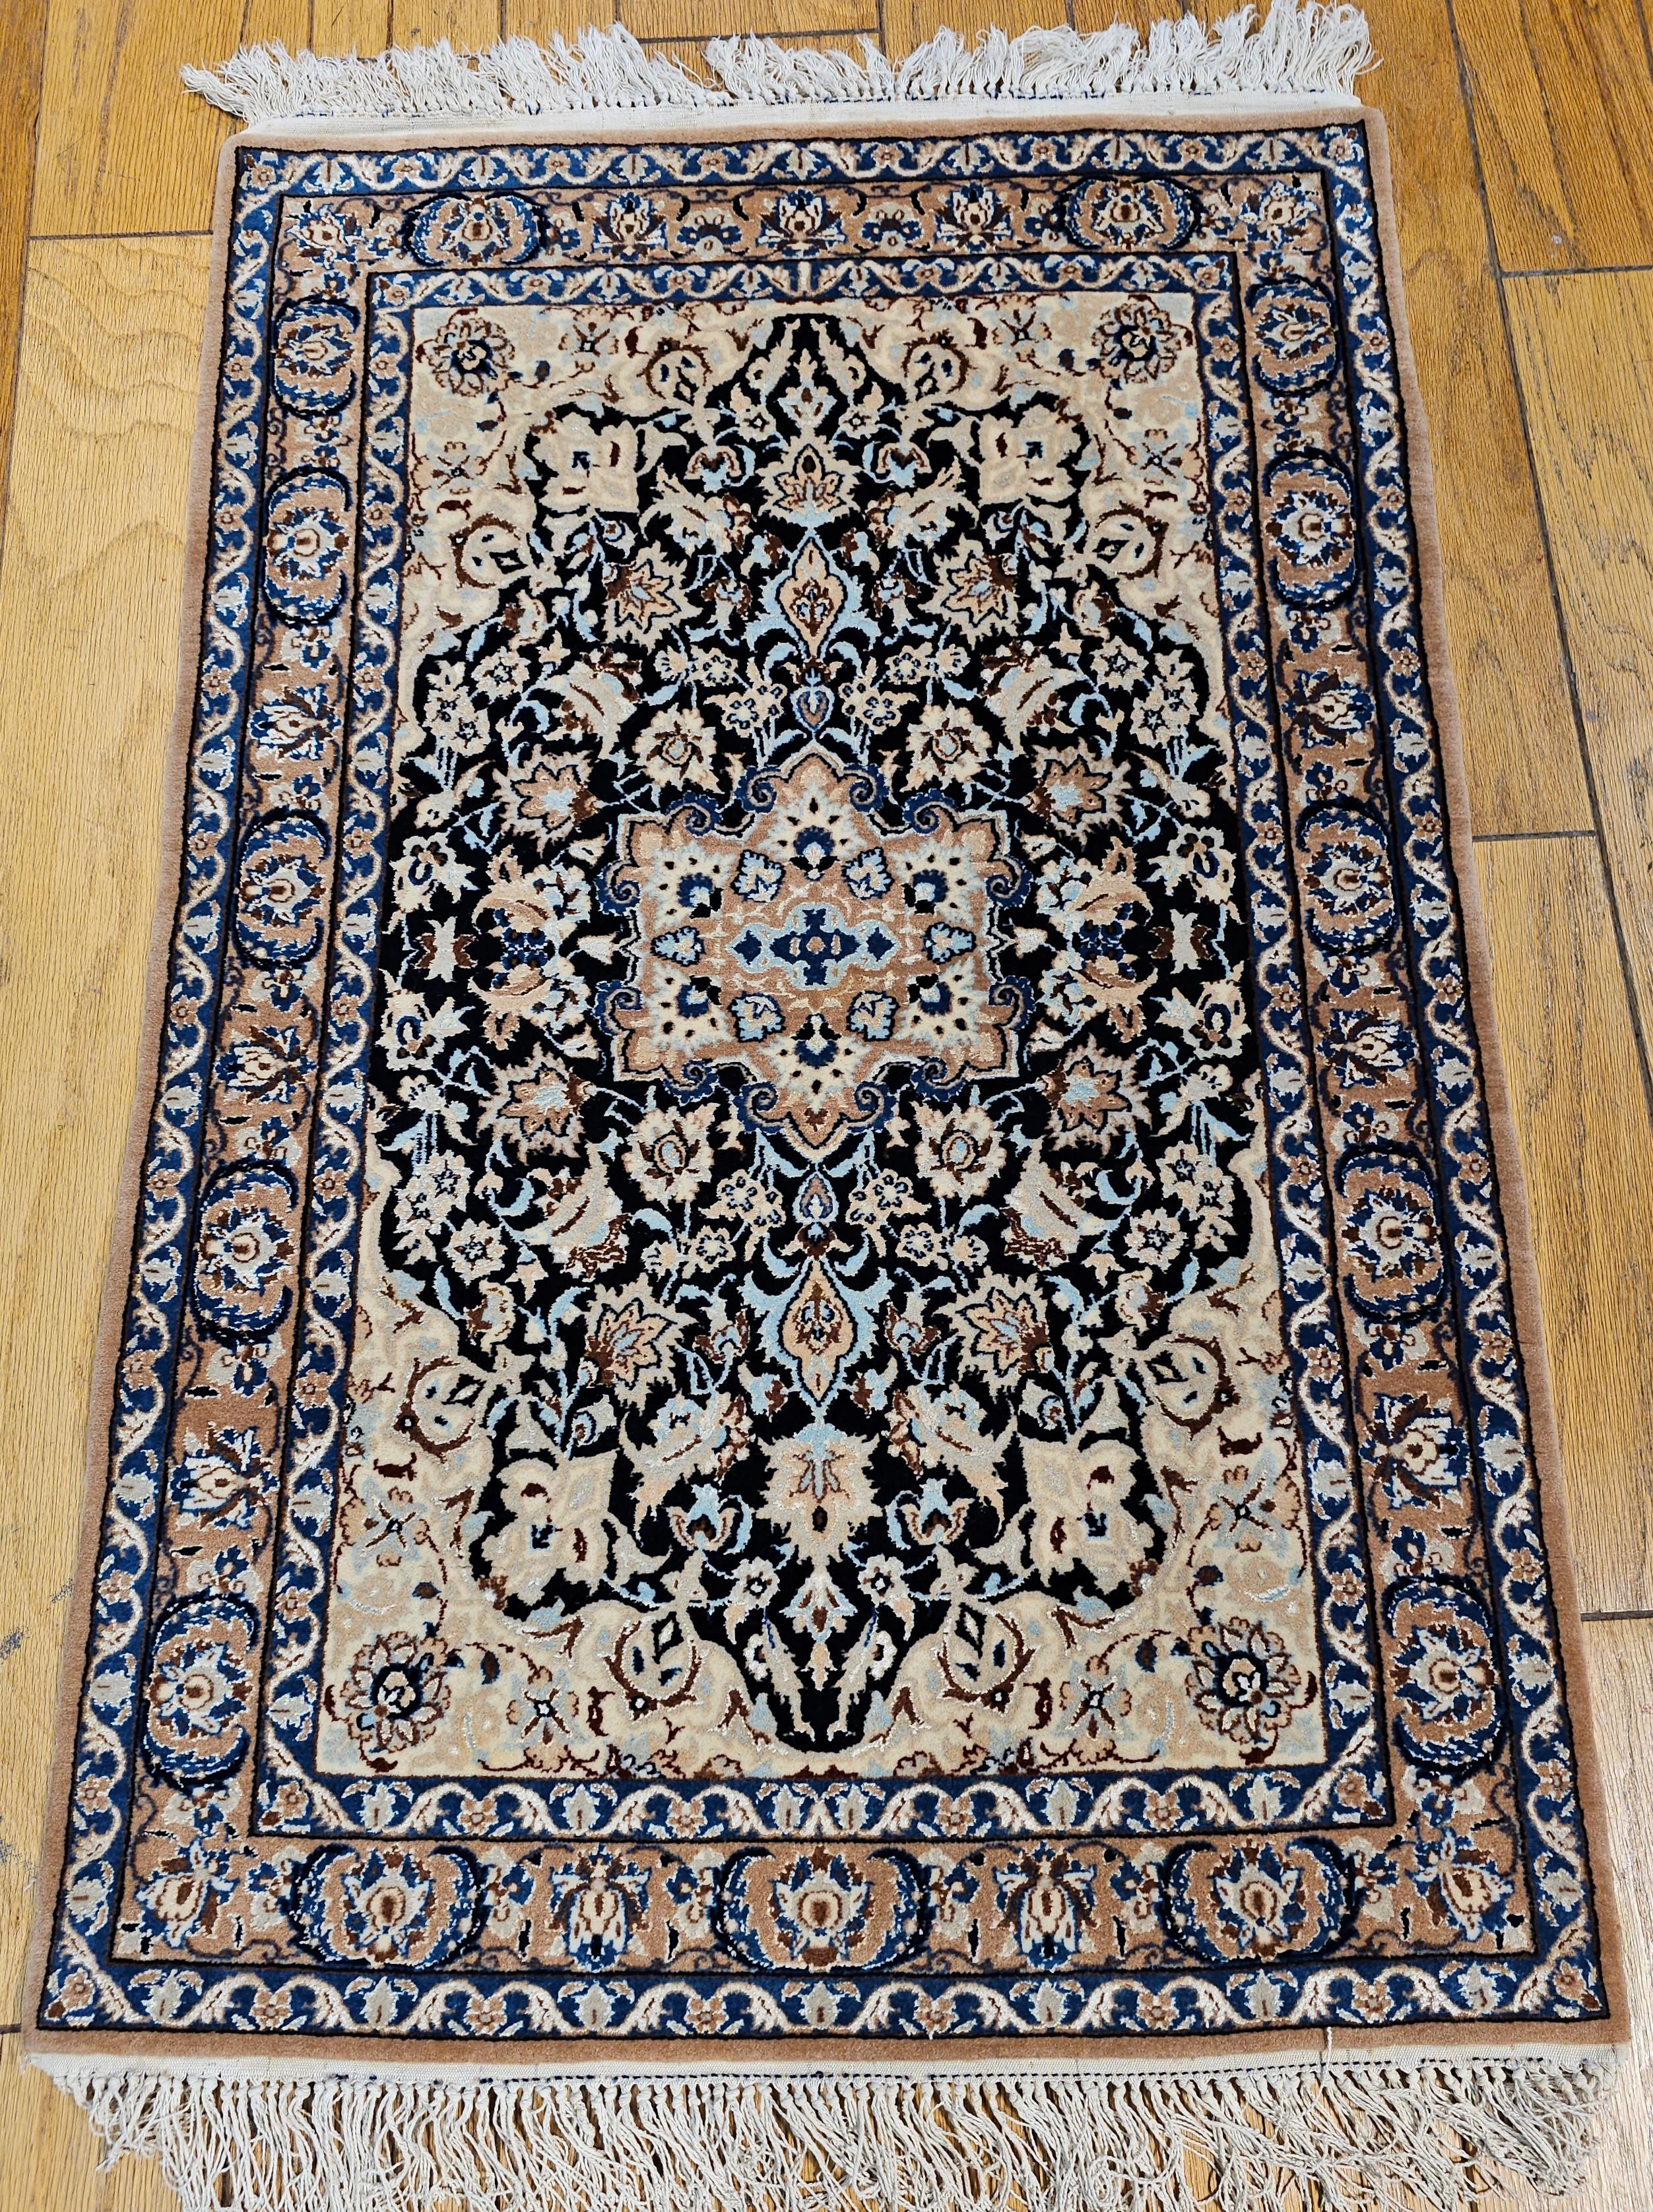 A handwoven Nain area rug from the 3rd quarter of the 1900s with a fine weave with Tiffany and French Blue colors.   This Nain rug has a beautiful floral design set in a rich navy blue field color with a beige color border.  The design colors in the